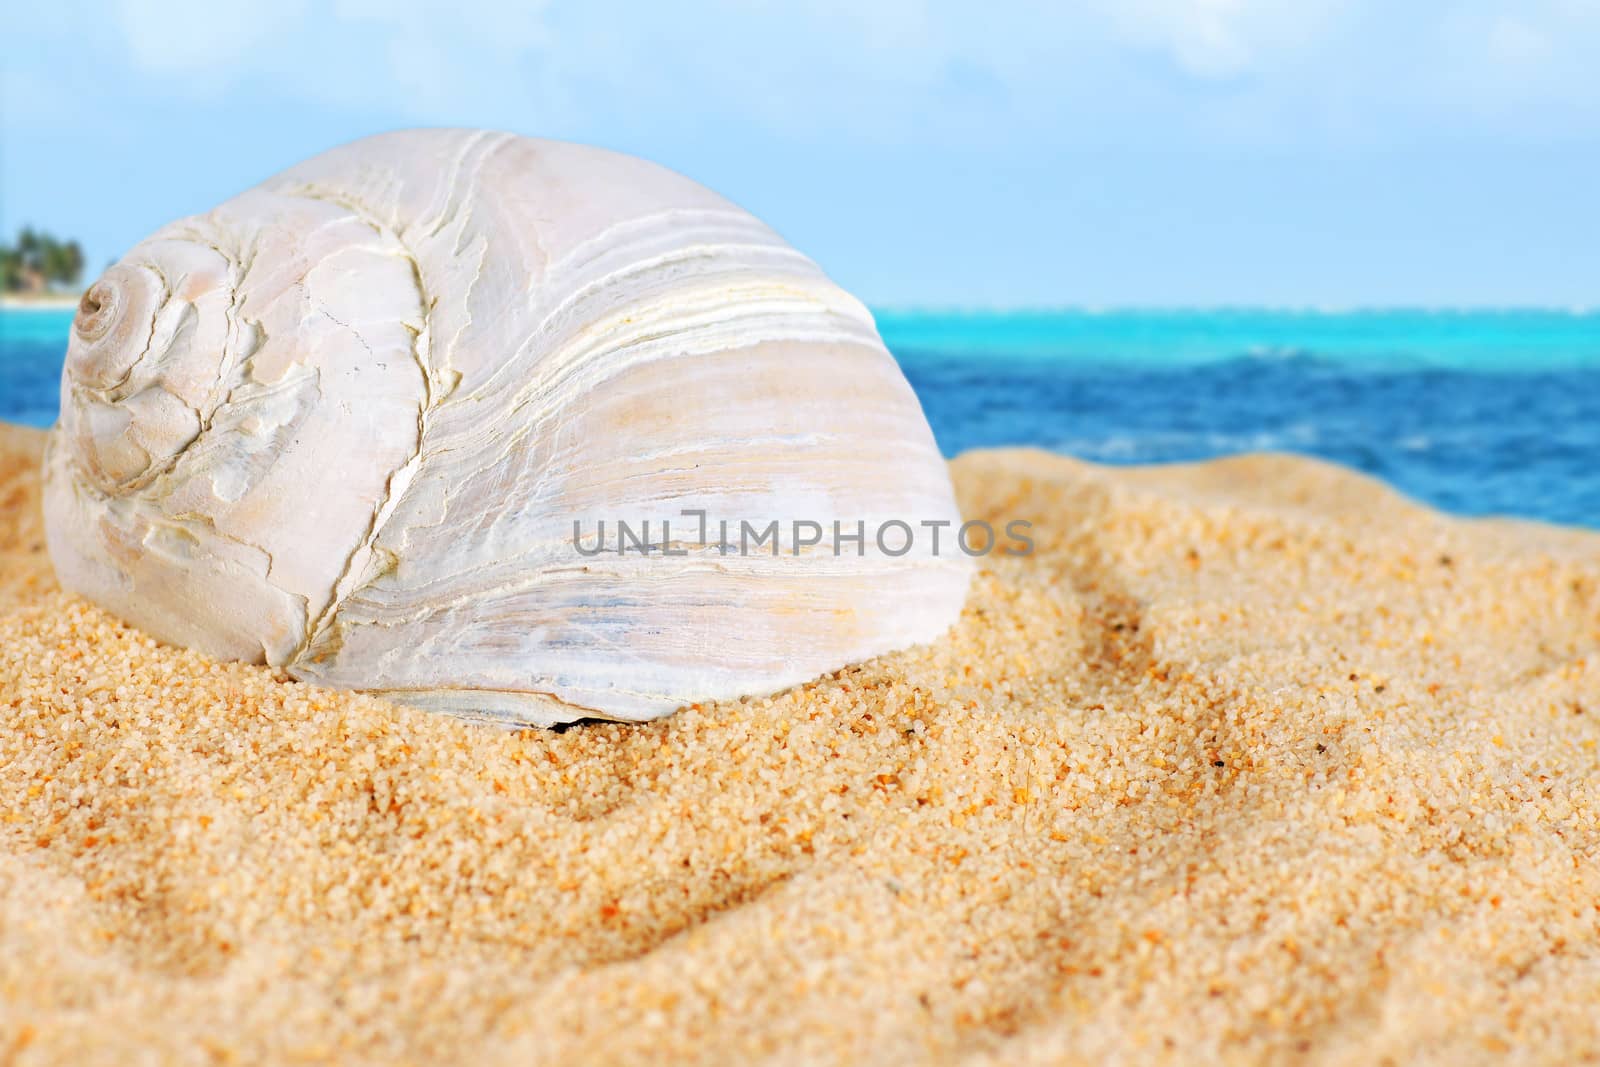 Large snail shell on the beach sand with Caribbean sea background